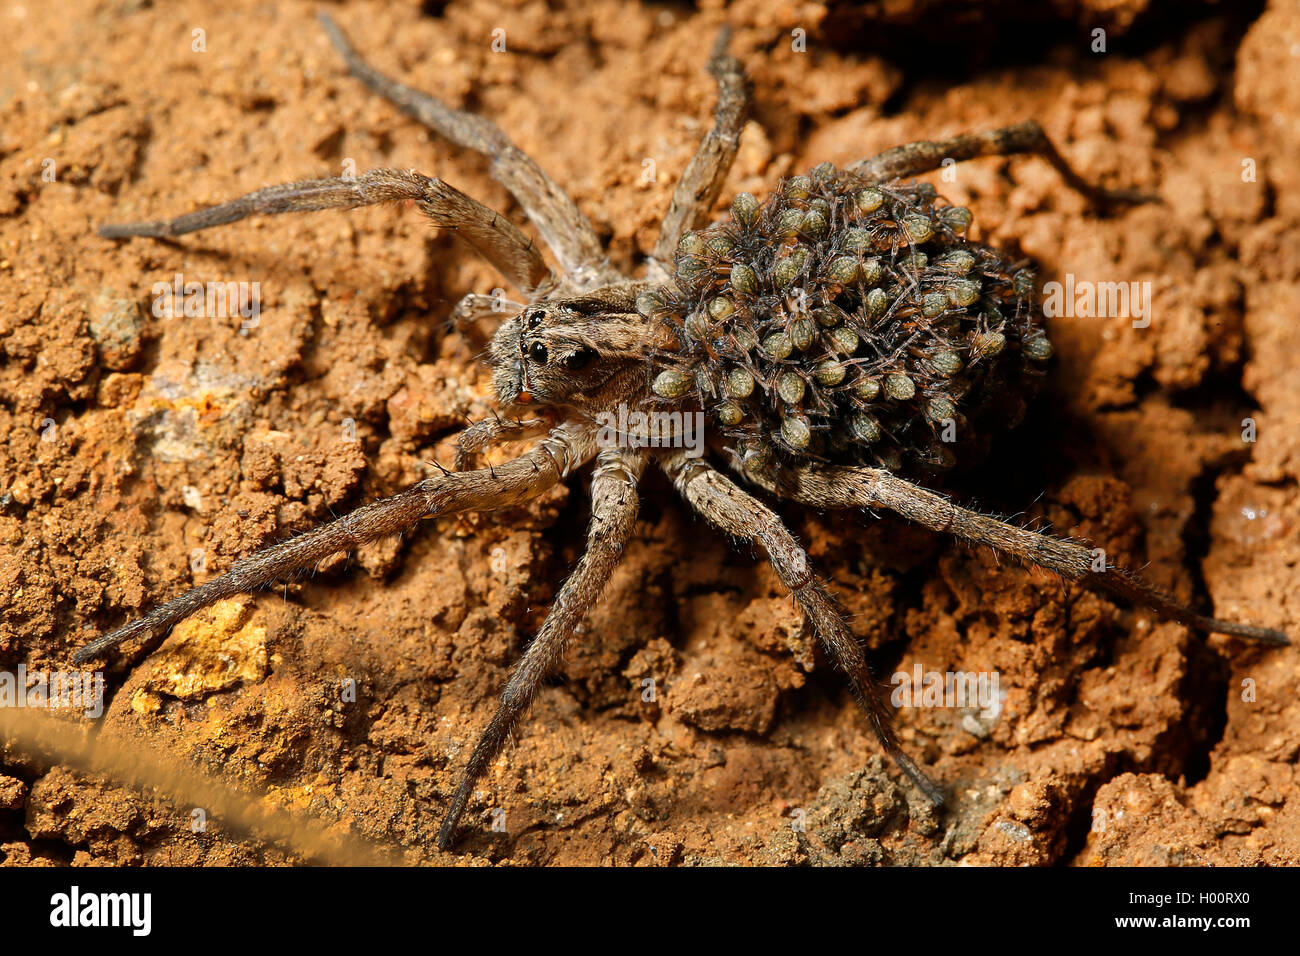 Tropical wolf spider (Lycosidae), with lots of spiderlings on its back, Costa Rica Stock Photo